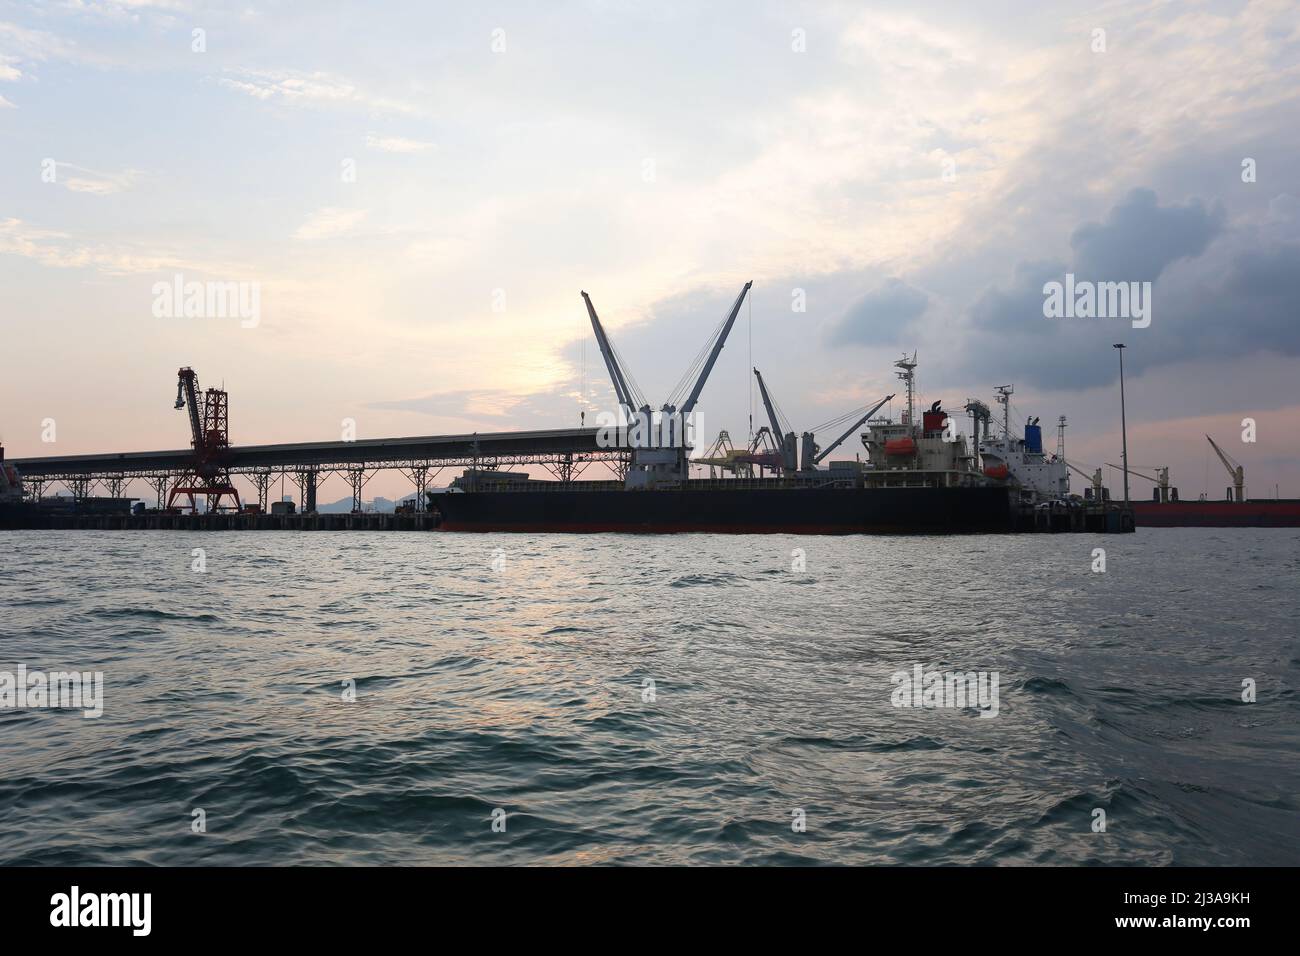 Deep sea port in the morning on a day when the sky is bright. Stock Photo